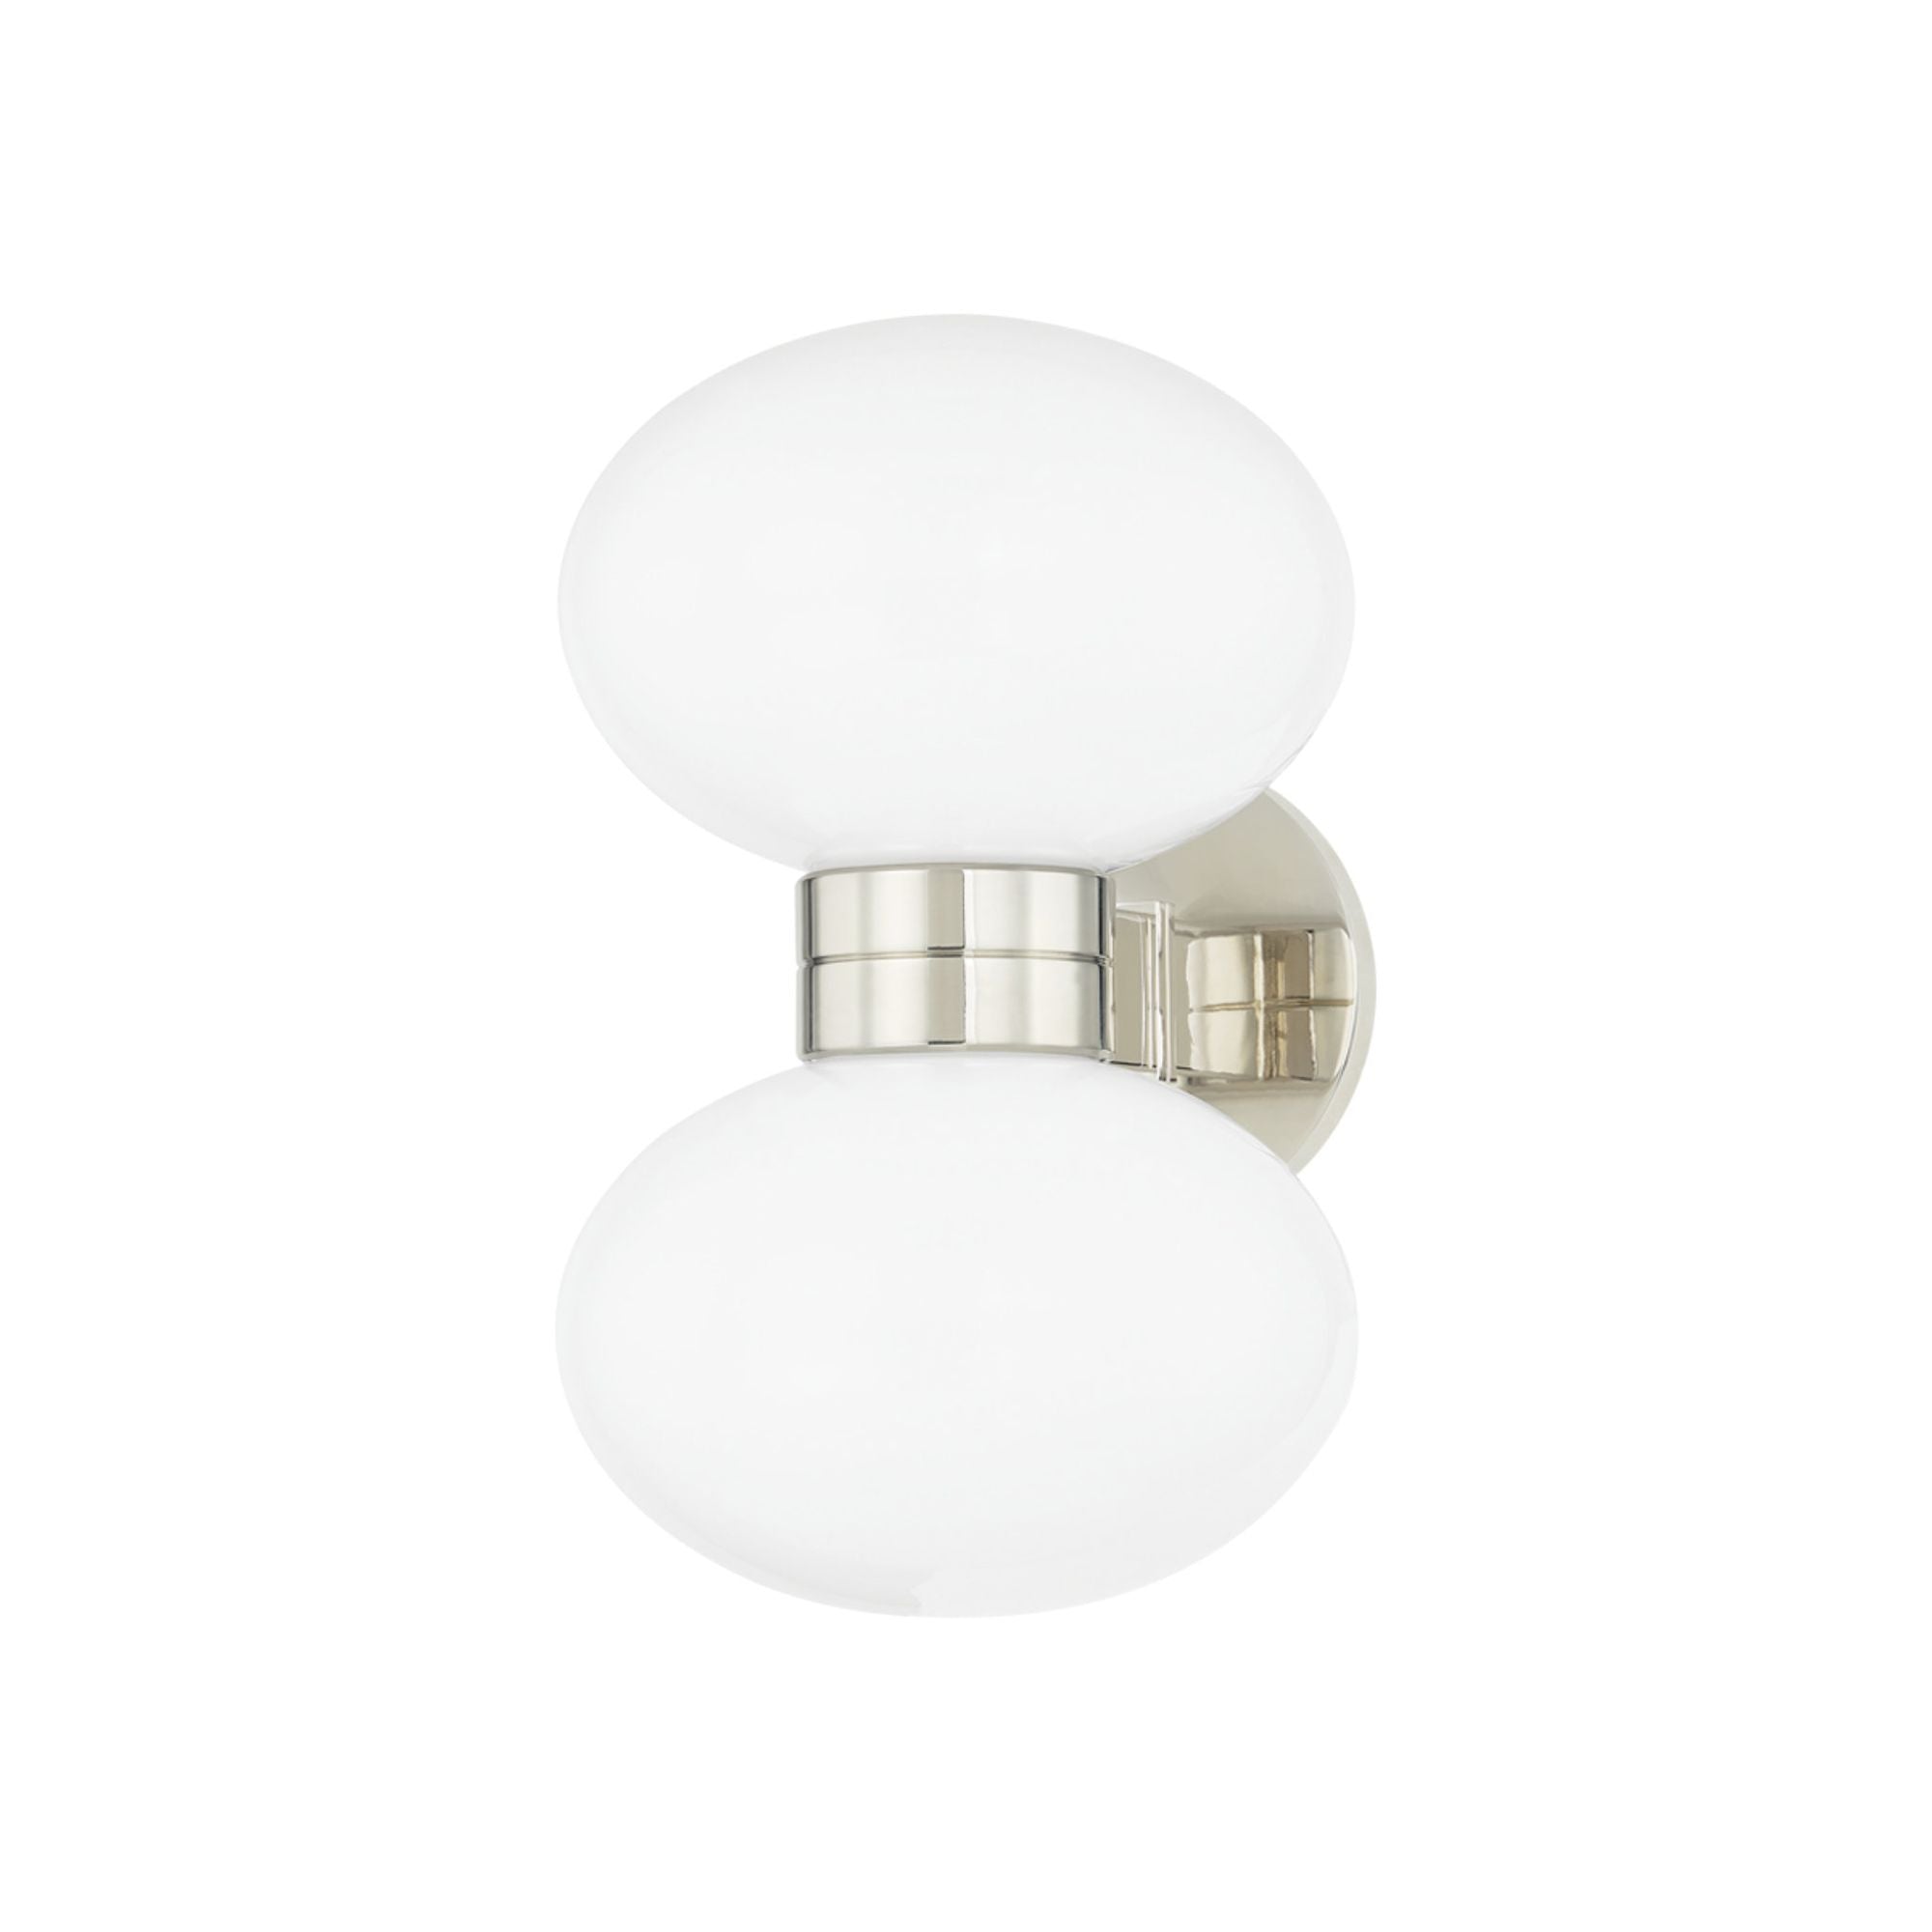 Otsego 2 Light Wall Sconce in Polished Nickel